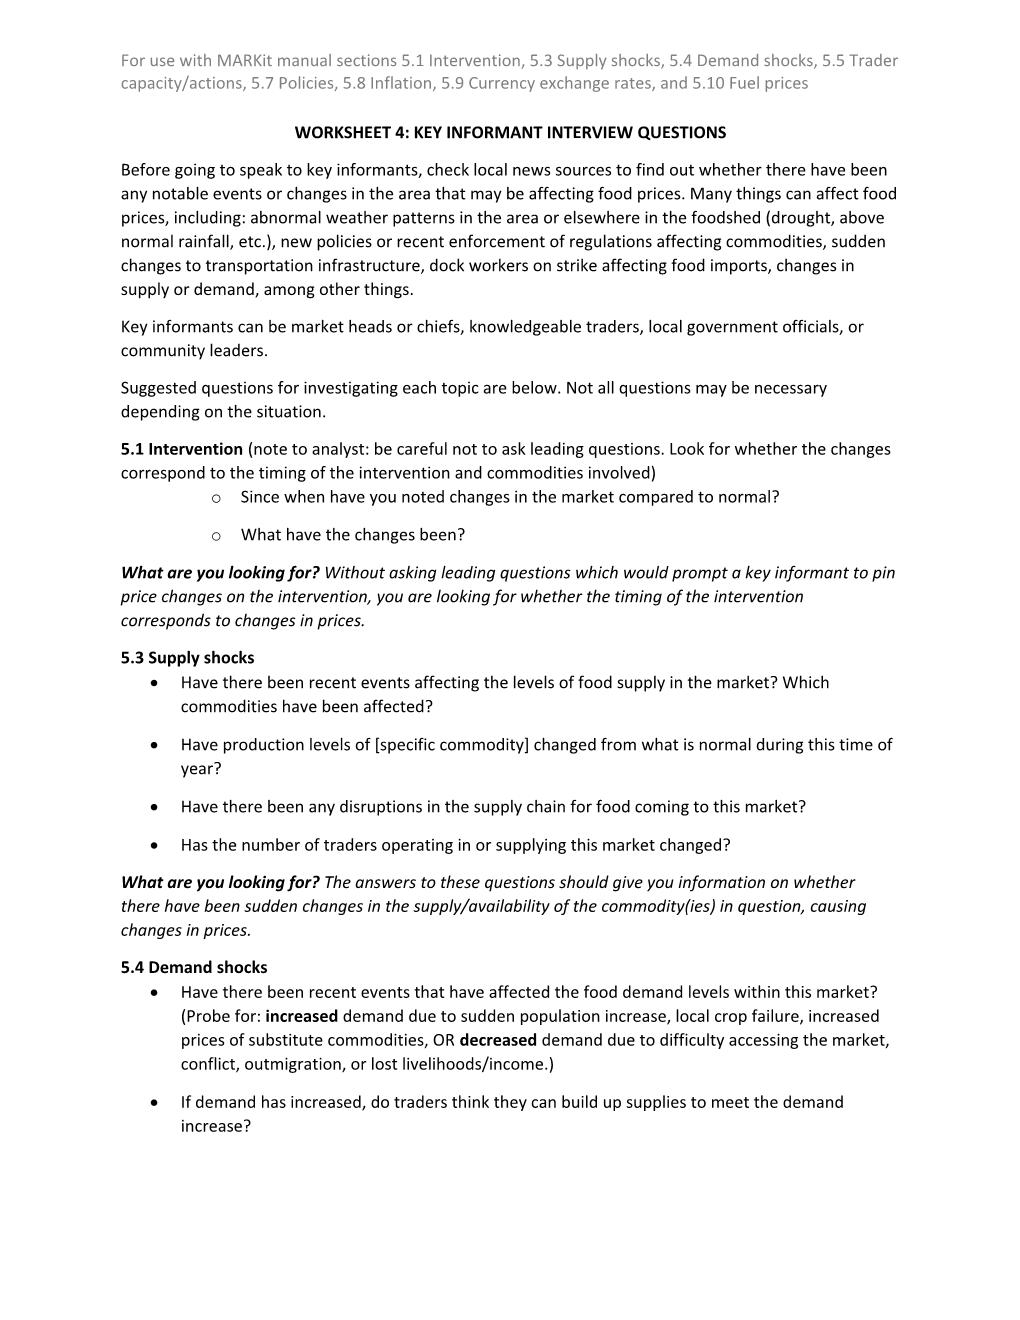 Worksheet 4: Key Informant Interview Questions